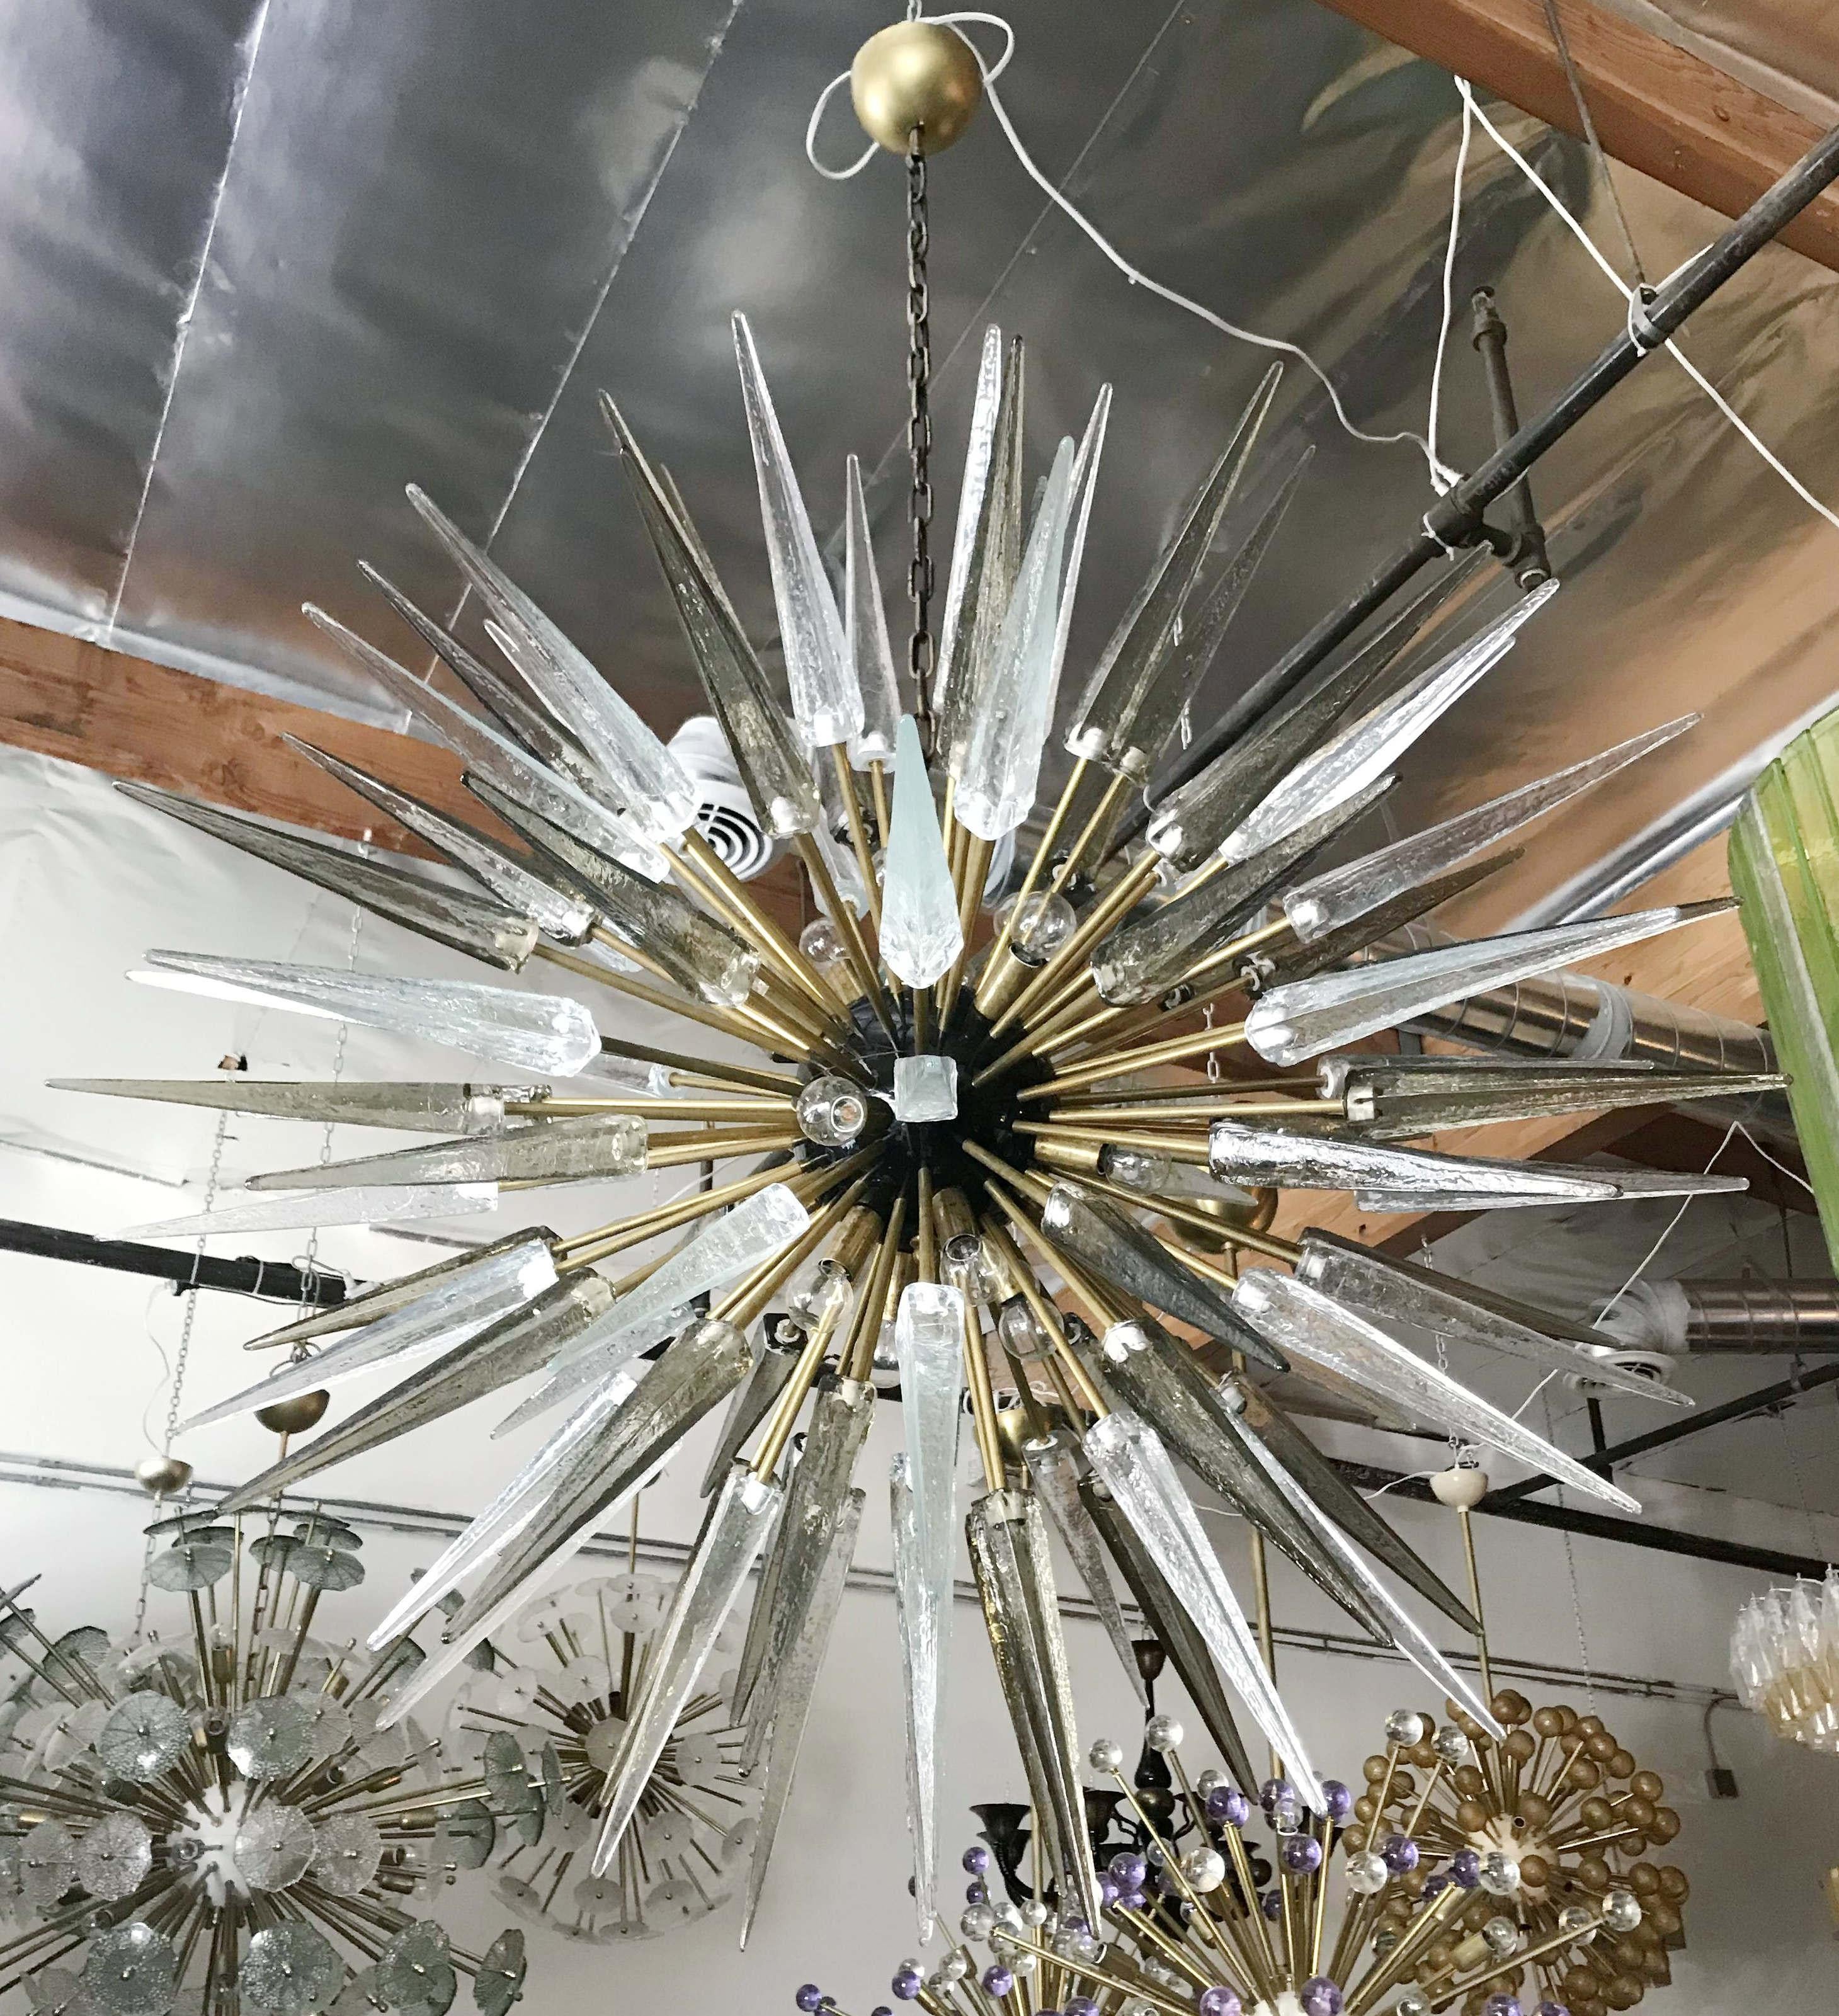 Italian modern sputnik chandelier with clear and smoky Murano glass shards spikes, mounted on natural unlacquered brass frame with black enameled centre, designed by Fabio Bergomi for Fabio Ltd / Made in Italy
16 lights / E12 or E14 type / max 40W